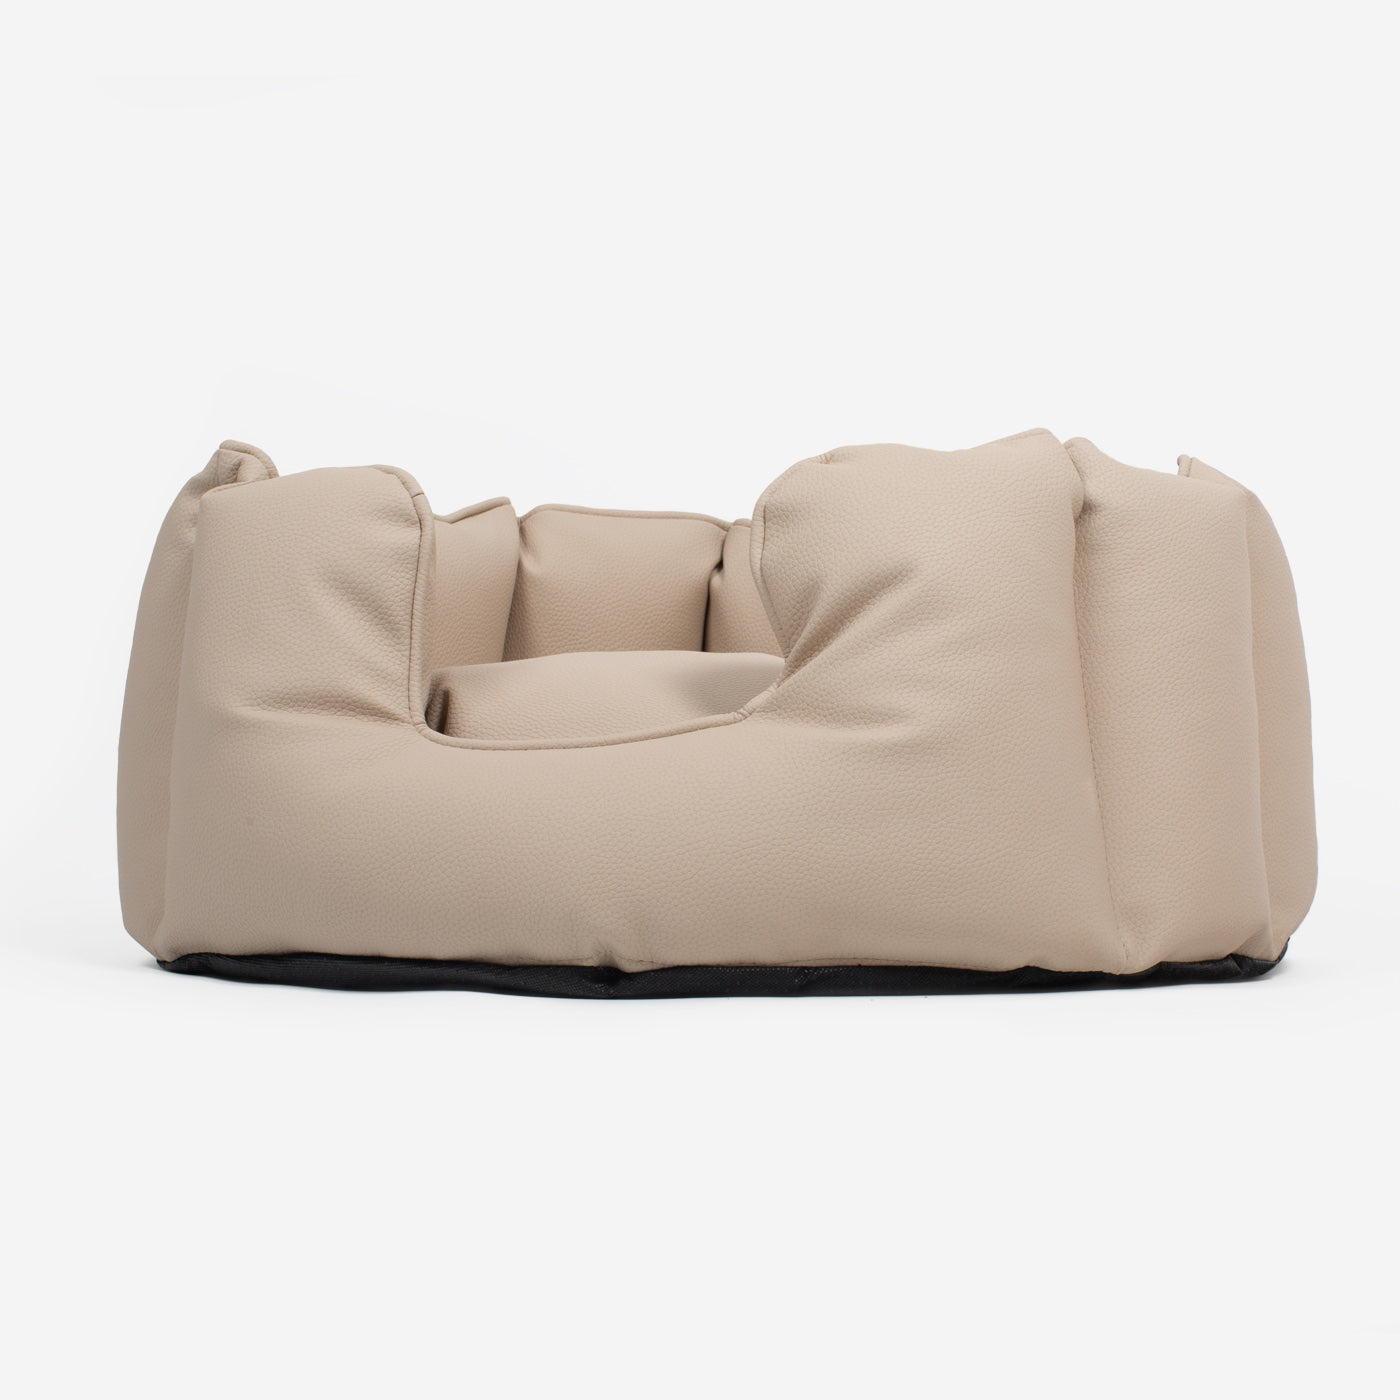 [color:sand] Luxury Handmade High Wall in Rhino Tough Desert Faux Leather, in Sand, Perfect For Your Pets Nap Time! Available To Personalize at Lords & Labradors US